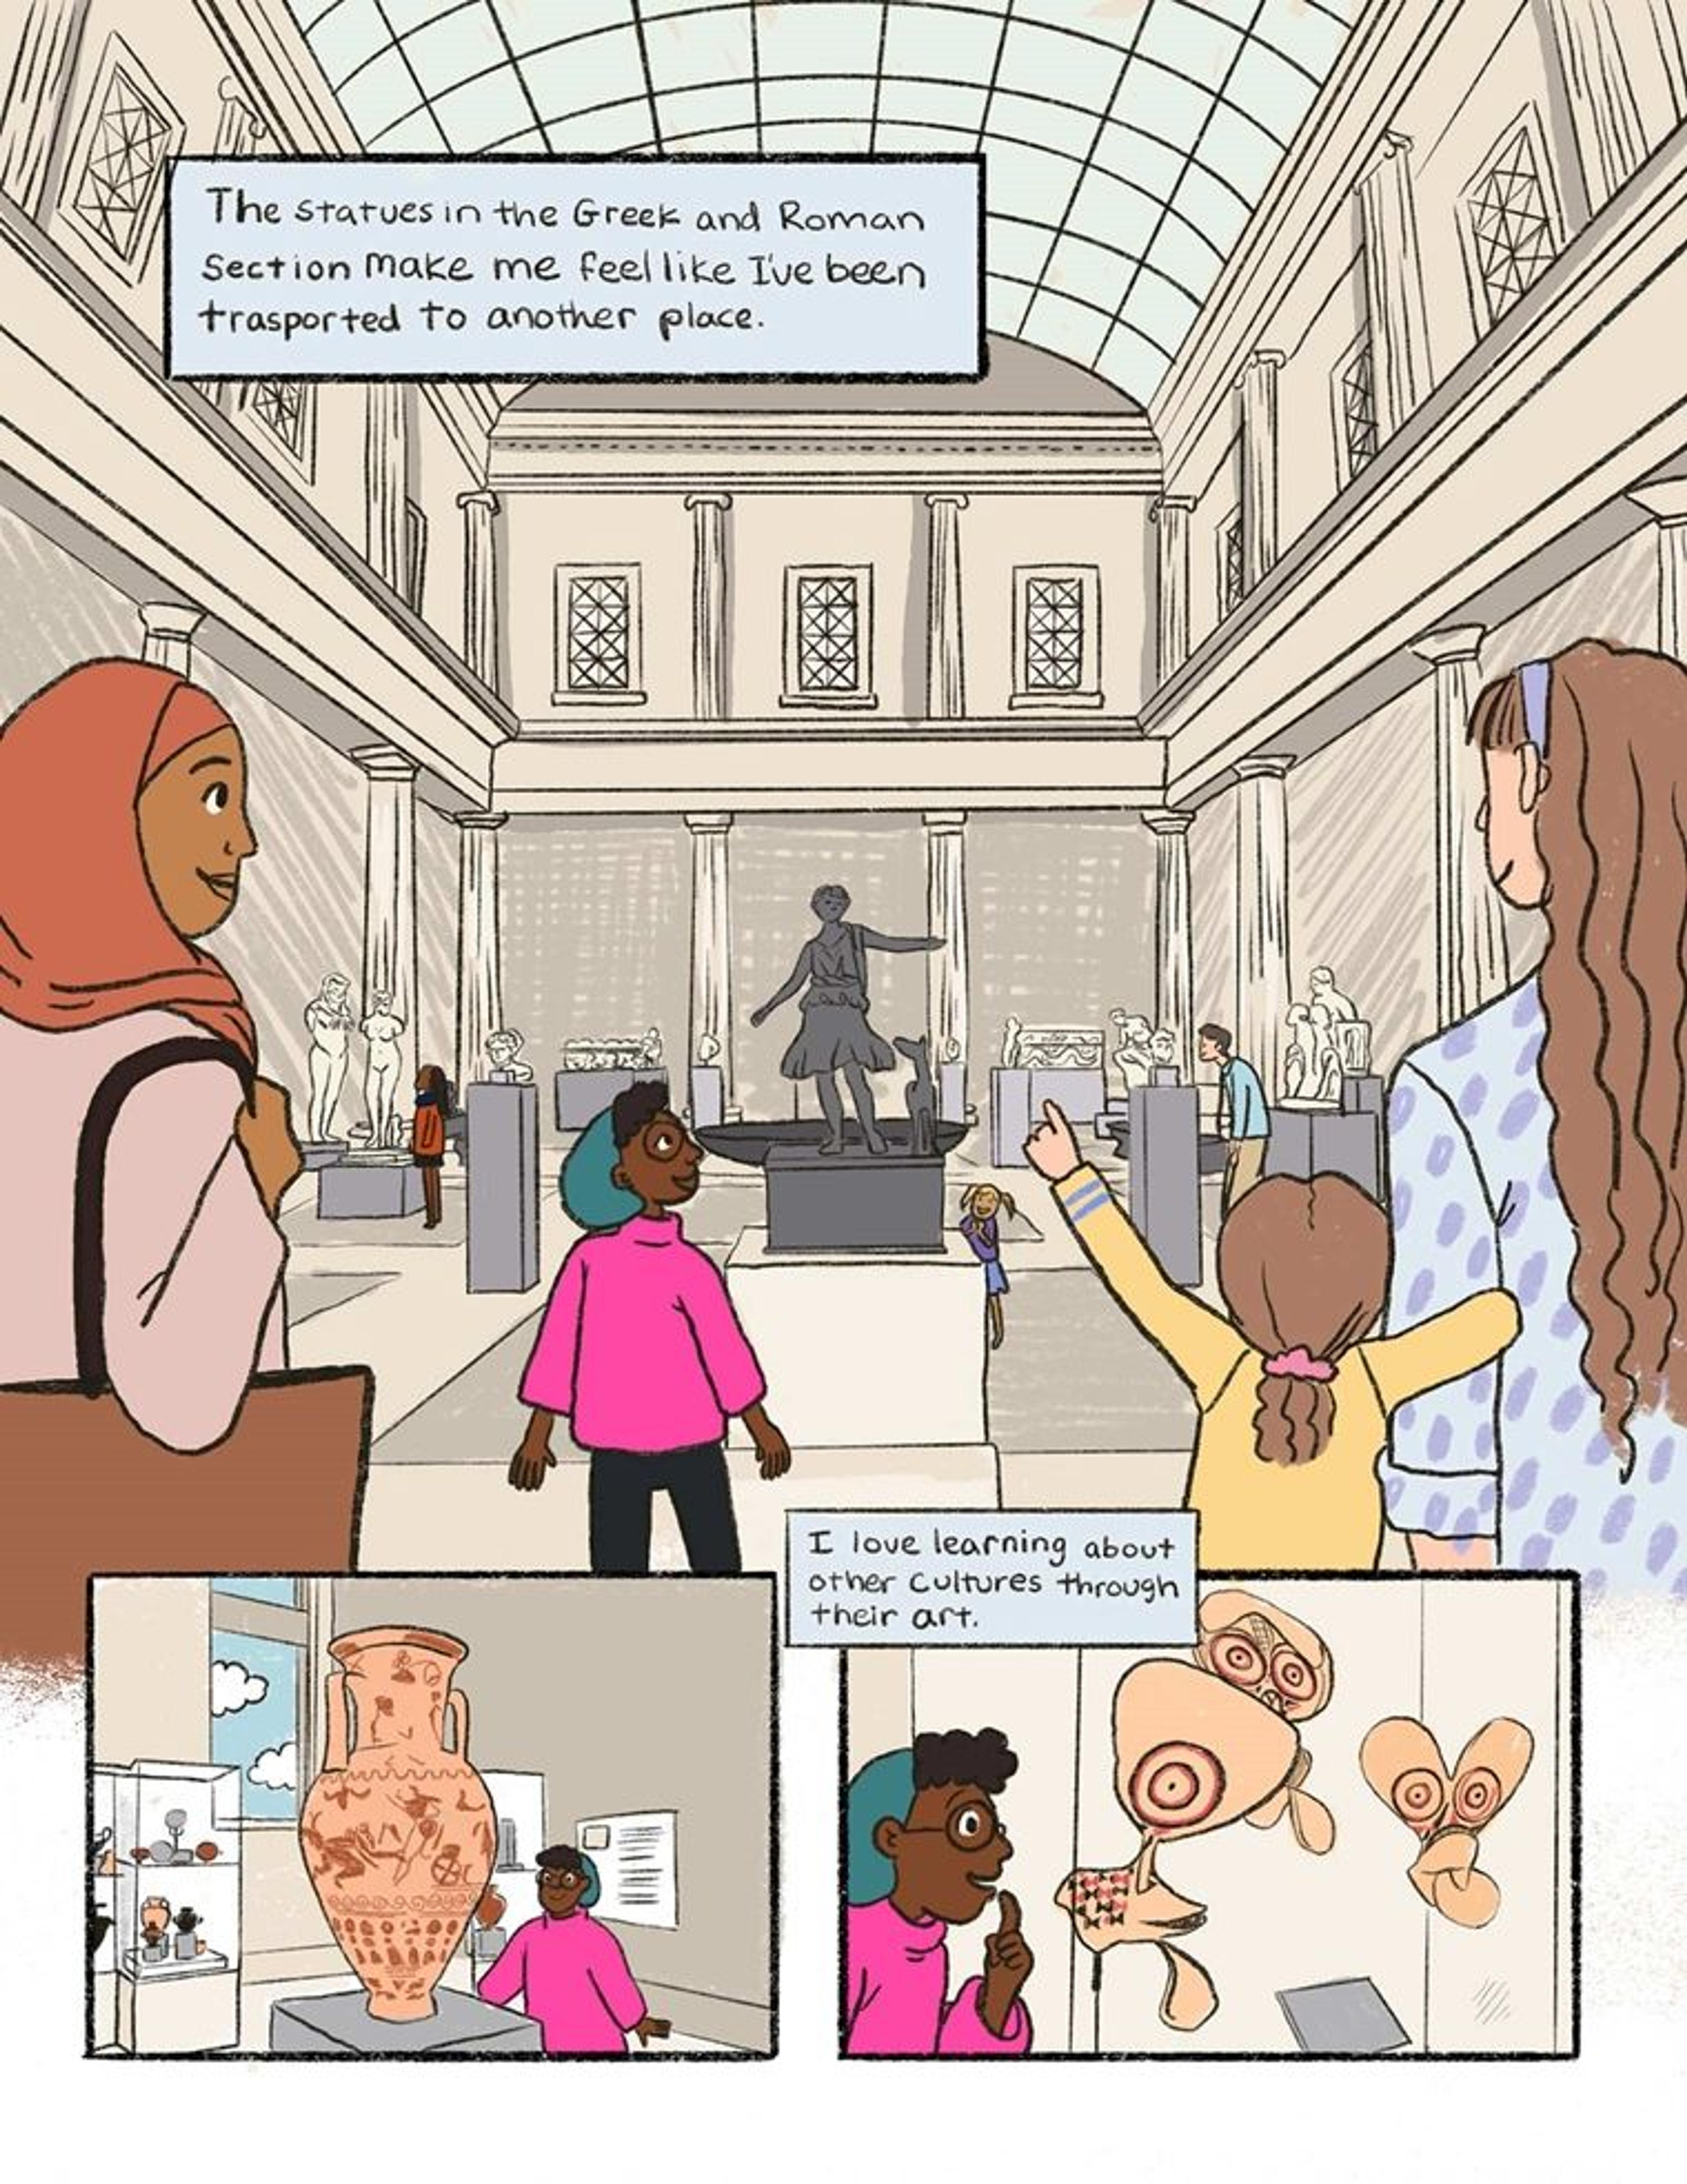 In this comic page, the girl in the pink sweater and green beret stands in the met's high ceilinged, skylit Greek and Roman hall. A Roman statue of a man with arms outstretched and a dog at his side is in the center of the page. Visiting individuals and families stand to either side of her. A text box over the image read: "The statues in the Greek and Roman section make me feel like I've been transported to another place." Below the larger image are two drawings of the girl admiring other pieces of art, a large vase that towers over her and a collection of huge canvas masks from Oceania. A text box reads "I love learning about other cultures through art."